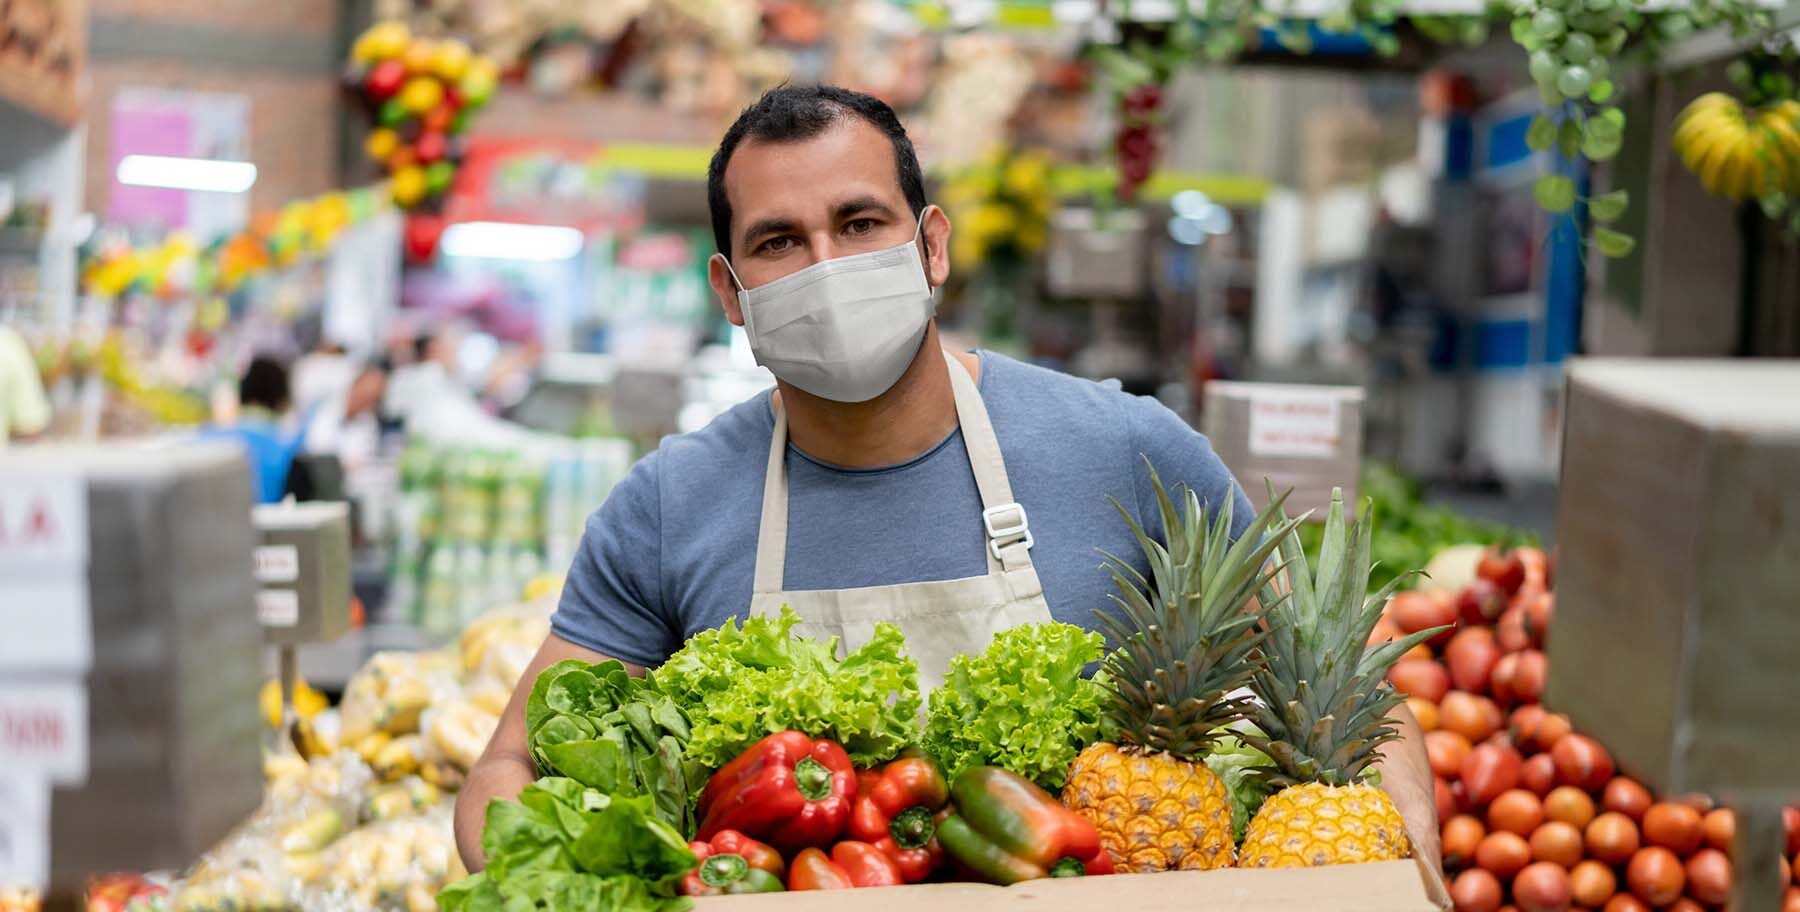 Latin American man carries box of vegetables while wearing a COVID mask.